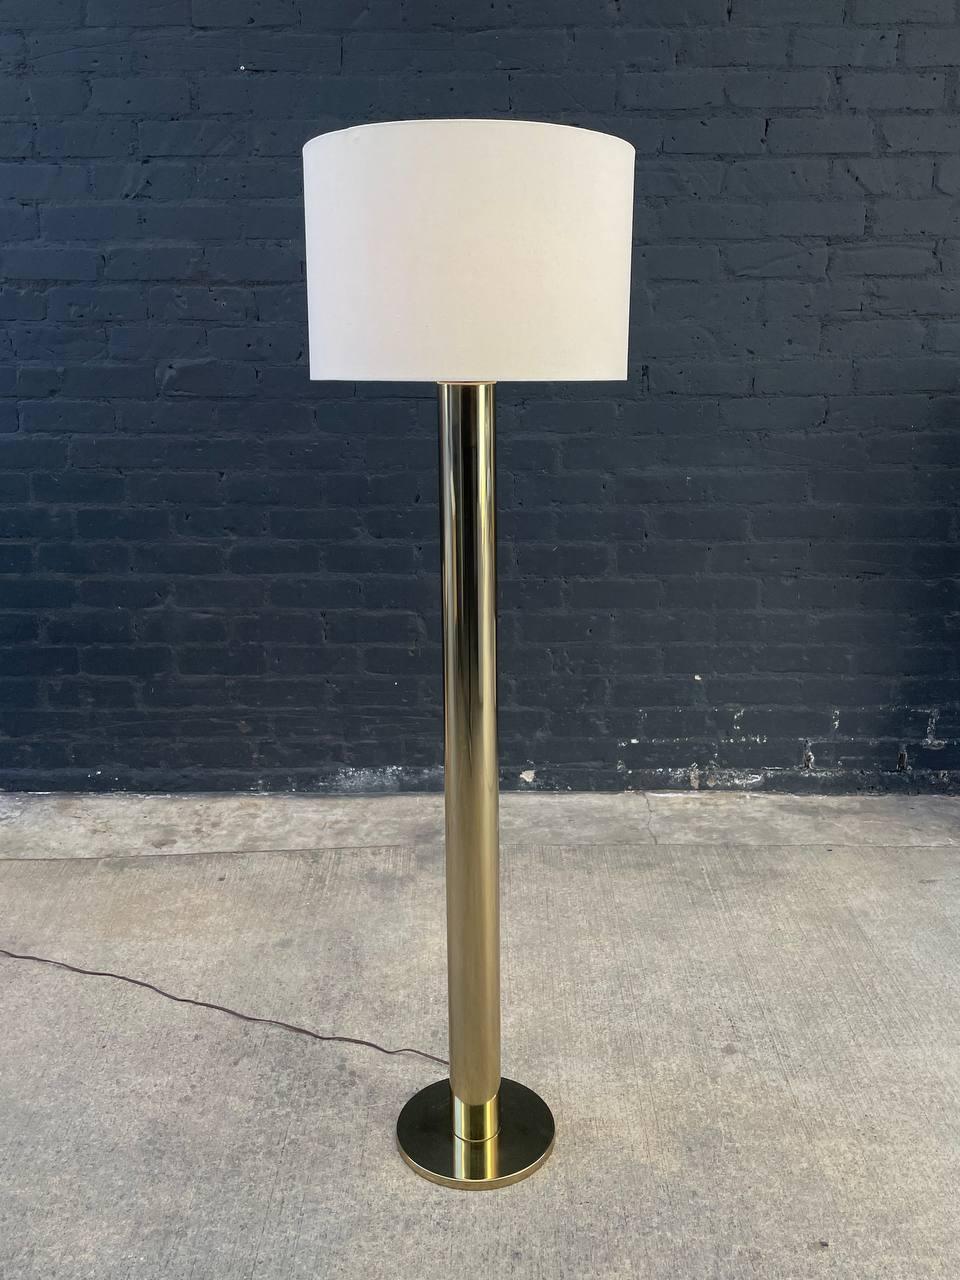 Newly Rewired, New Linen Shade

Dimensions: 
63”H x 11” W x 11” D
Shade:
12”H x 18” W x 18” D

Materials: Brass, New Linen Shade